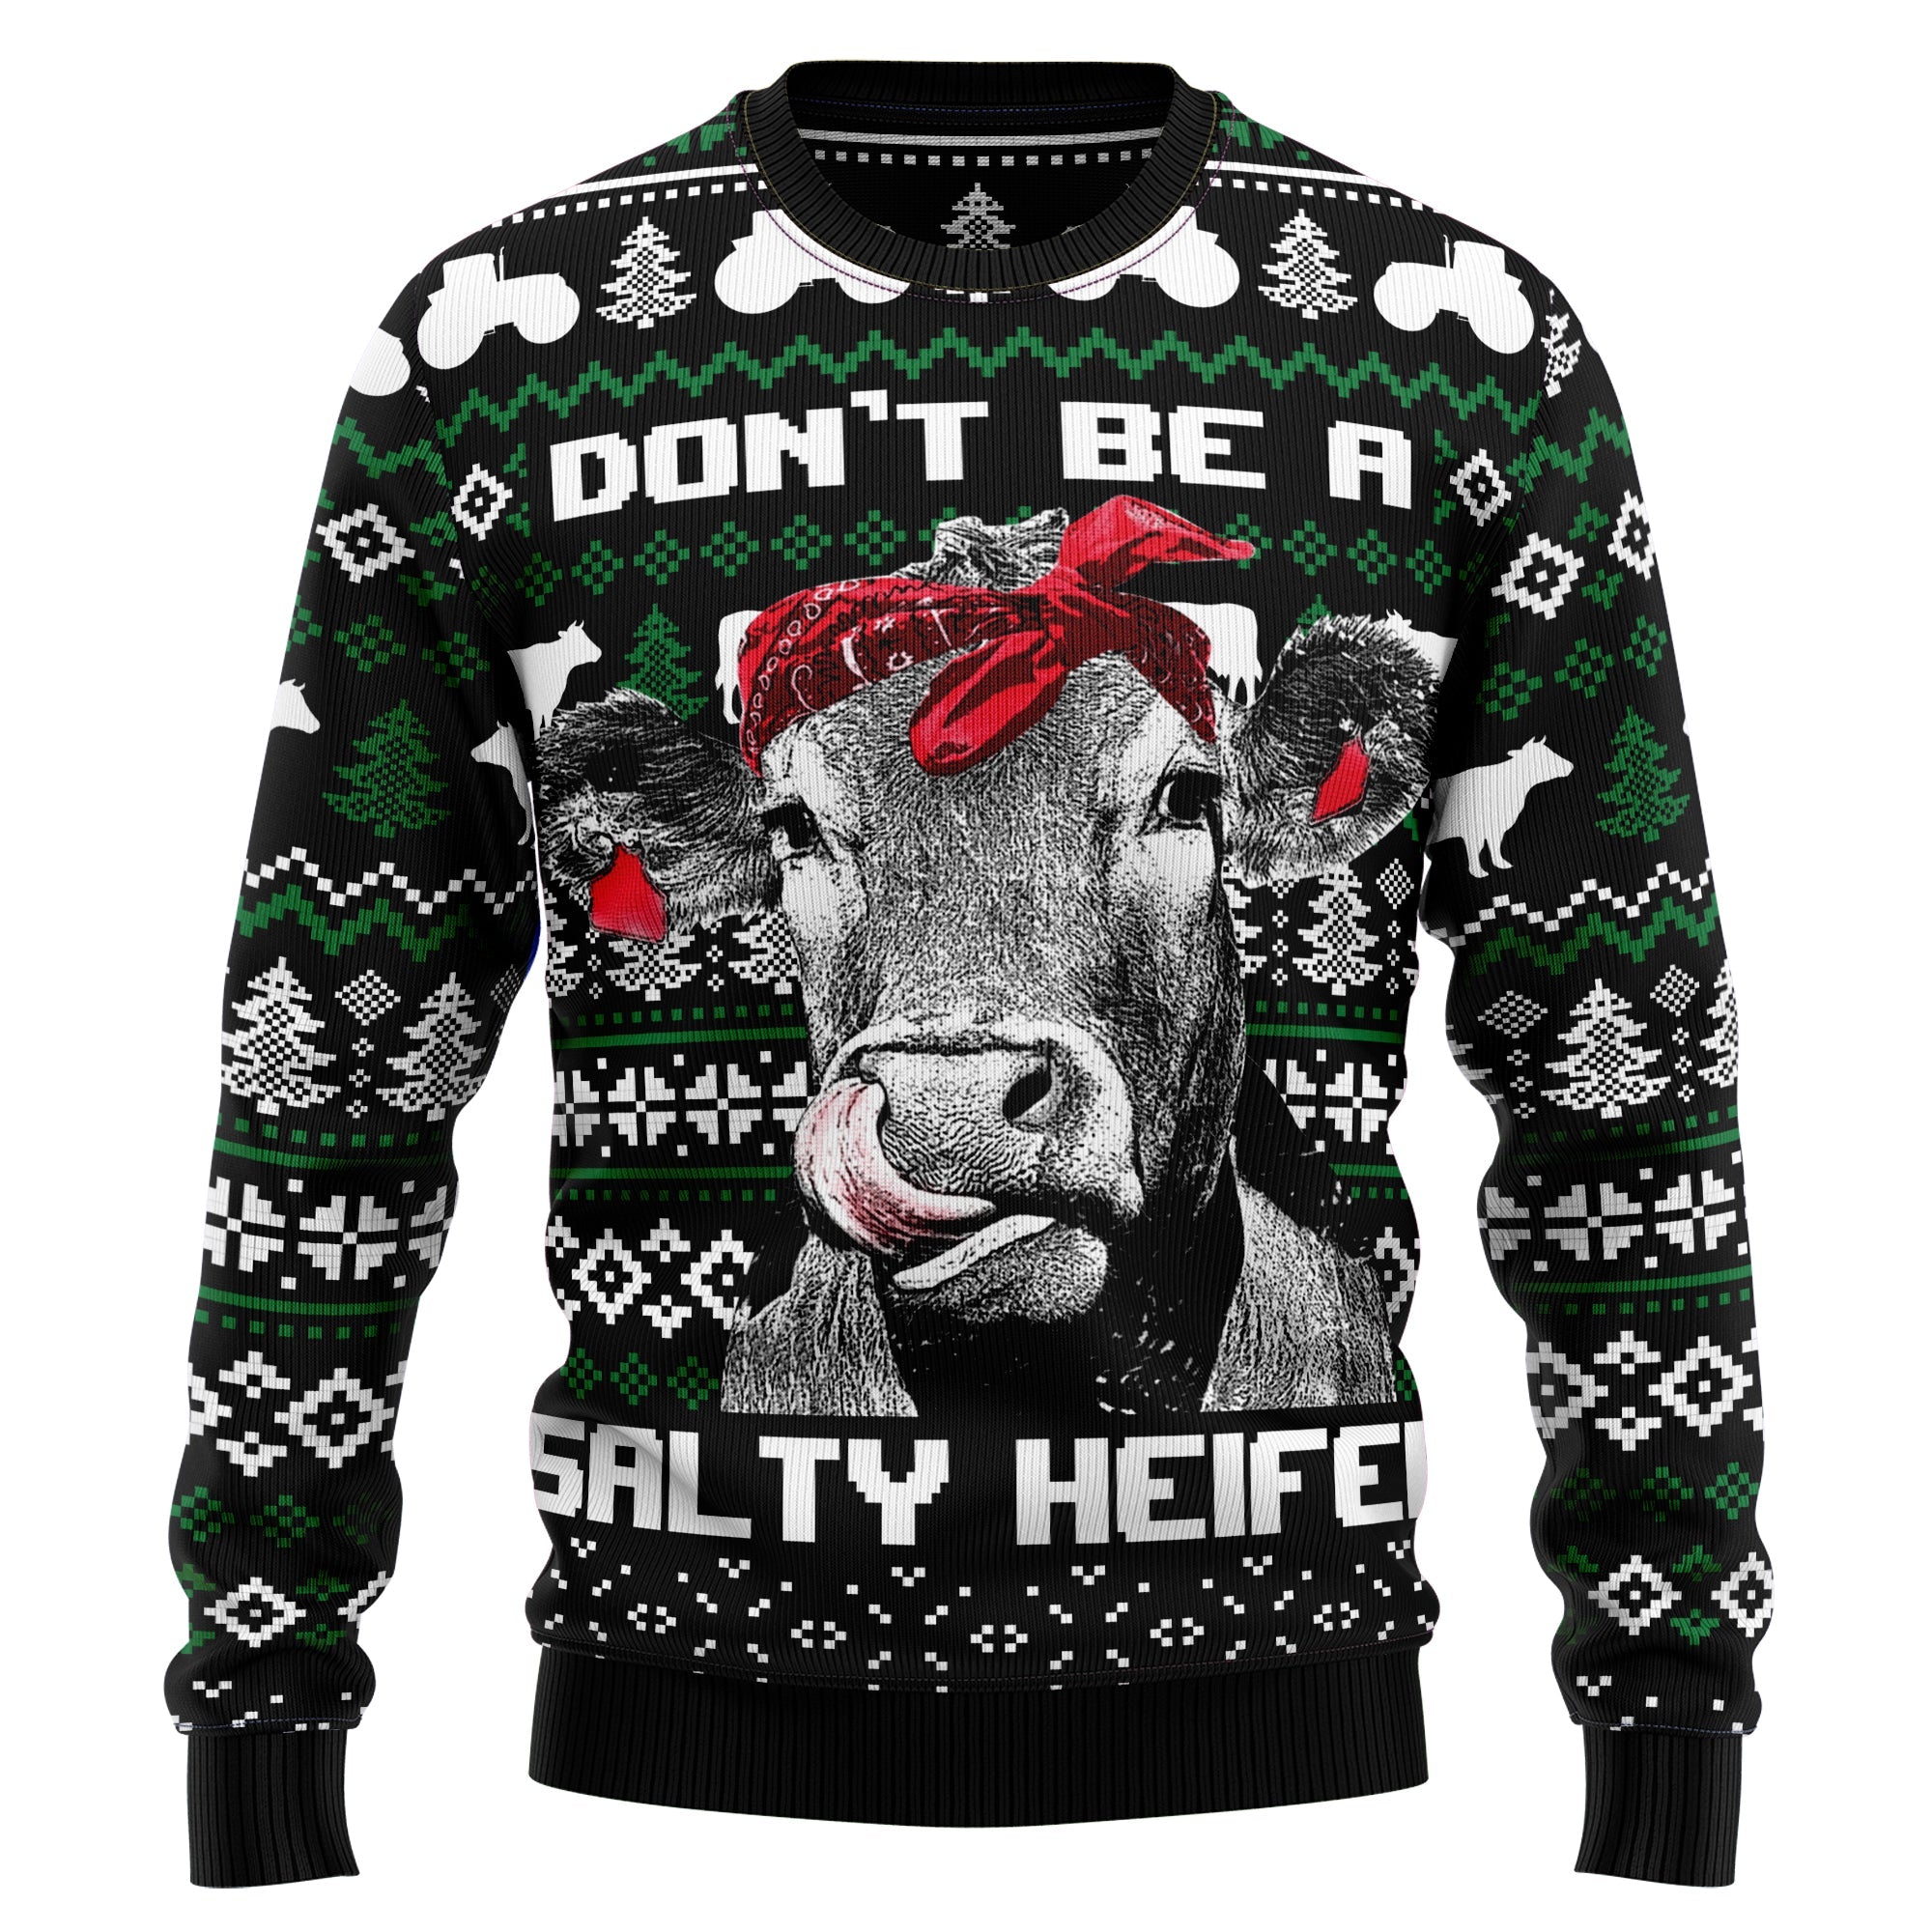 Cow Heifer Ugly Christmas Sweater For Men And Women